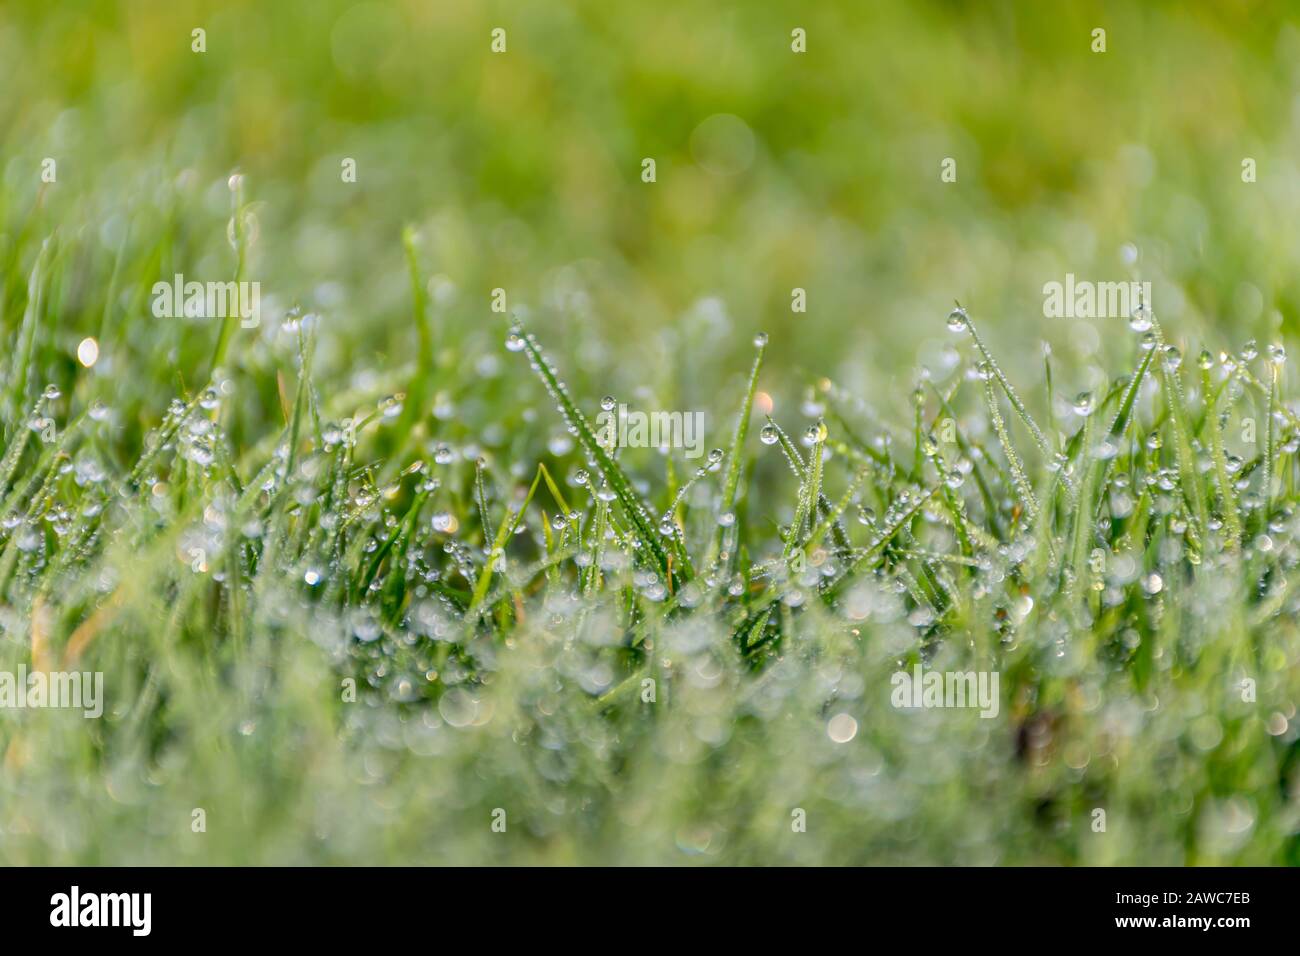 Spring green grass with raindrops Stock Photo